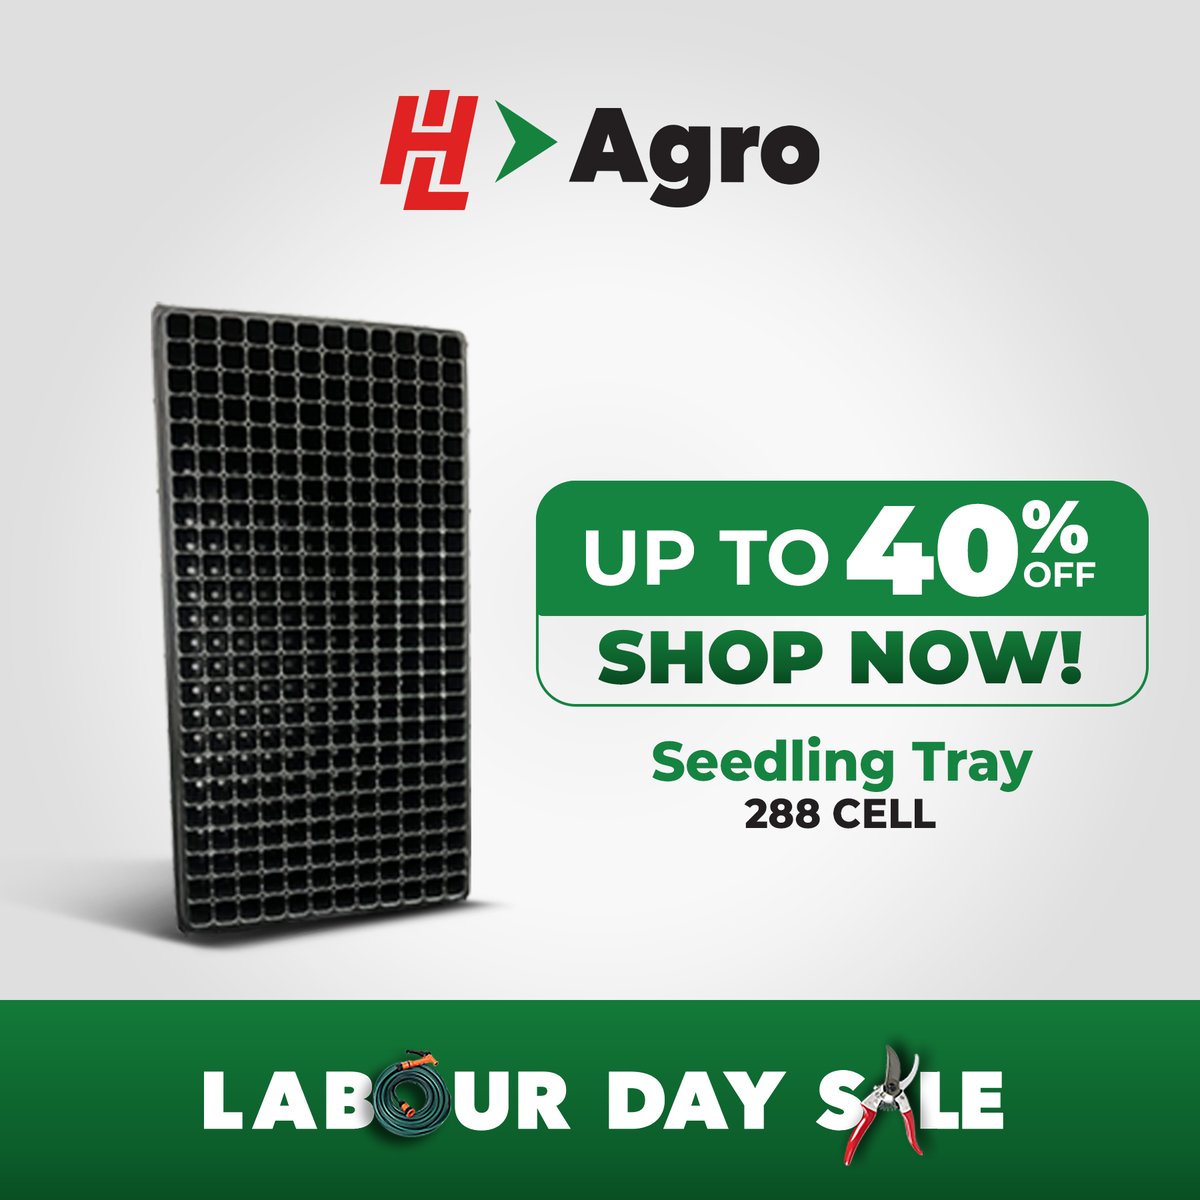 This Labour Day, we’re supporting best gardening practices with up to 40% off your gardening essentials. Shop now and elevate your gardenIng experience. #HLAgro #LabourDaySale